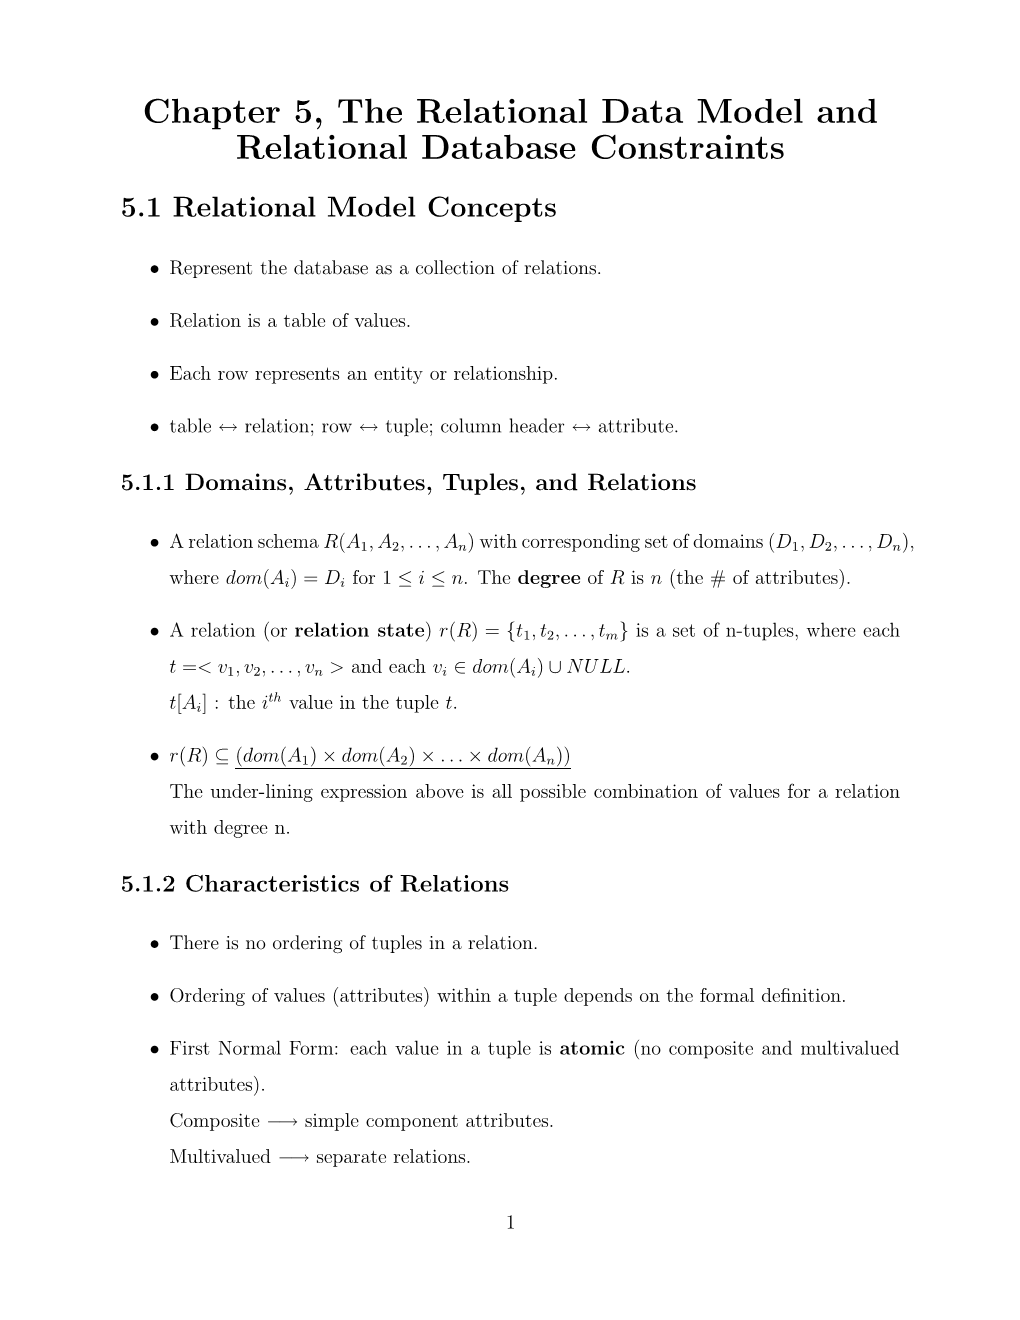 Chapter 5, the Relational Data Model and Relational Database Constraints 5.1 Relational Model Concepts